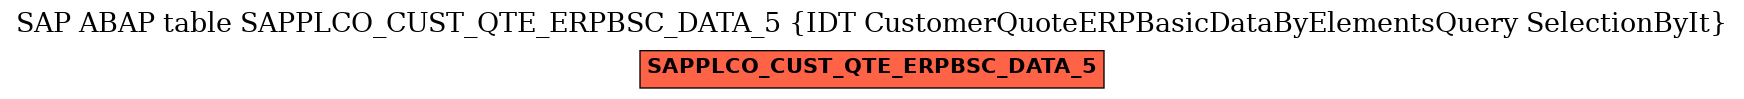 E-R Diagram for table SAPPLCO_CUST_QTE_ERPBSC_DATA_5 (IDT CustomerQuoteERPBasicDataByElementsQuery SelectionByIt)